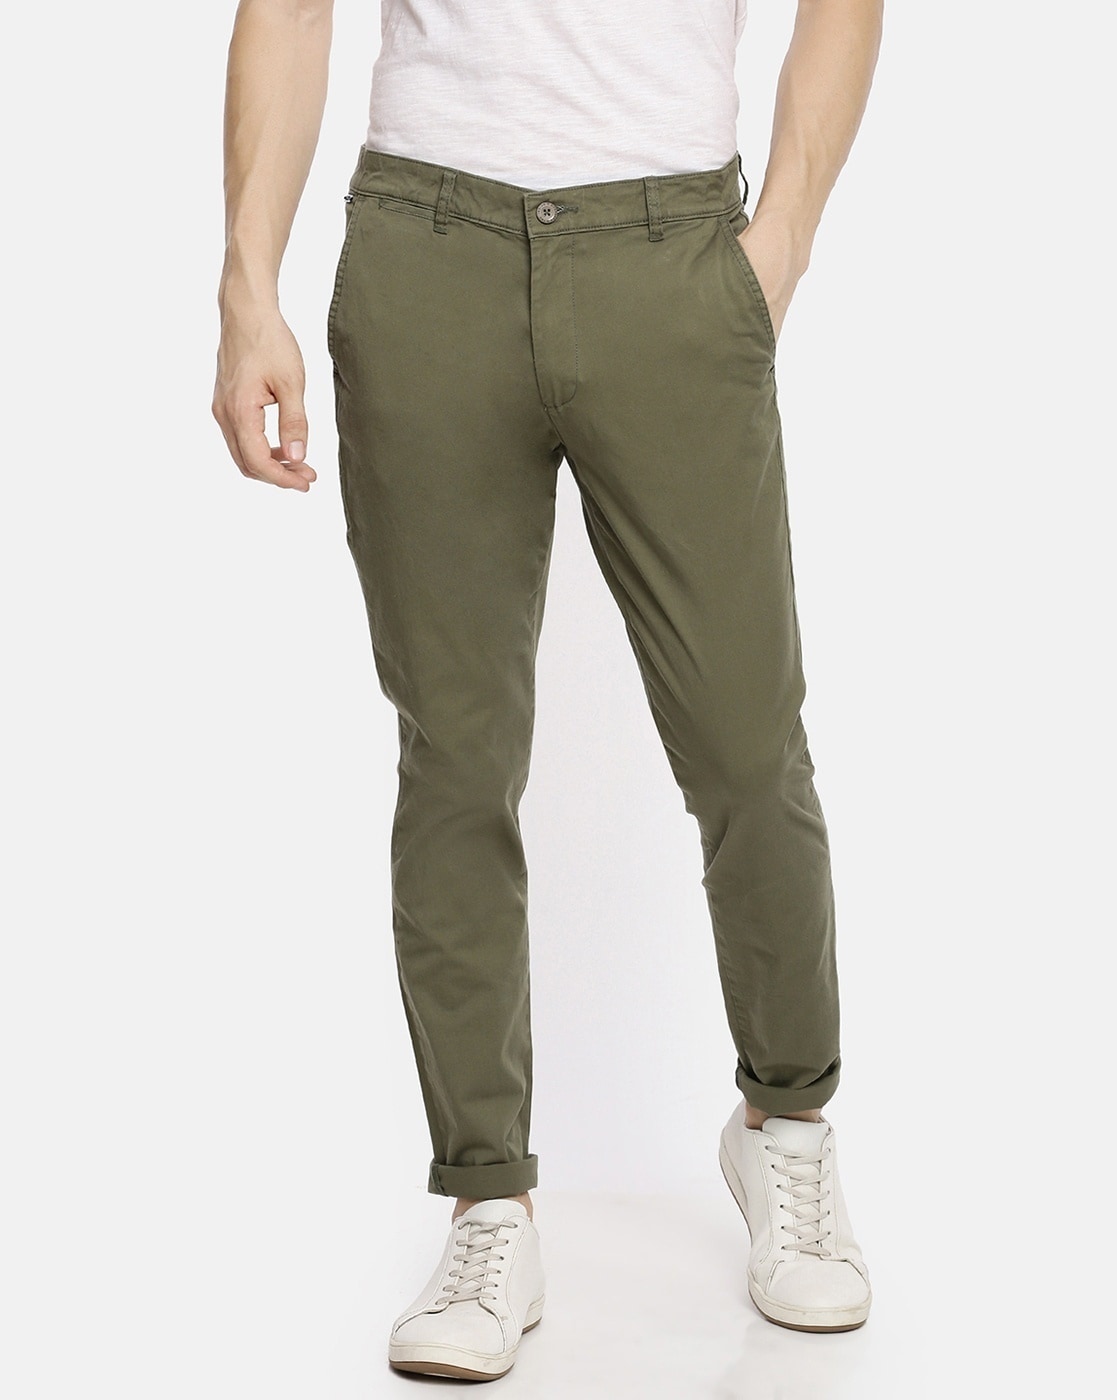 Multicolor Mens Plain Chinos Trousers at Best Price in Delhi | Shoppers  Point